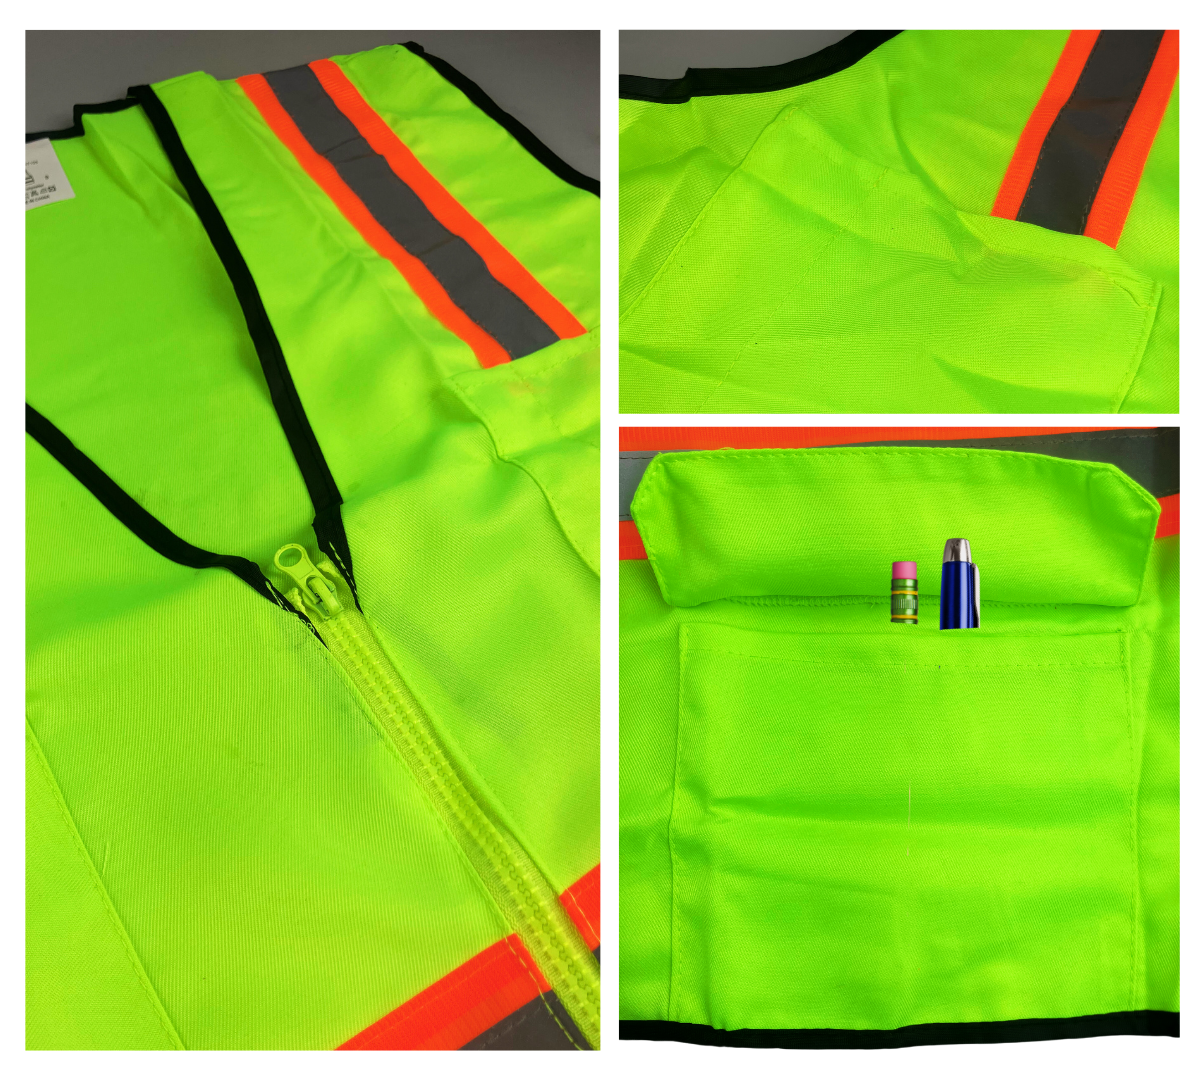 Bright Neon Green Safety Vest with Reflective Stripes - 3XL  - SF-73718